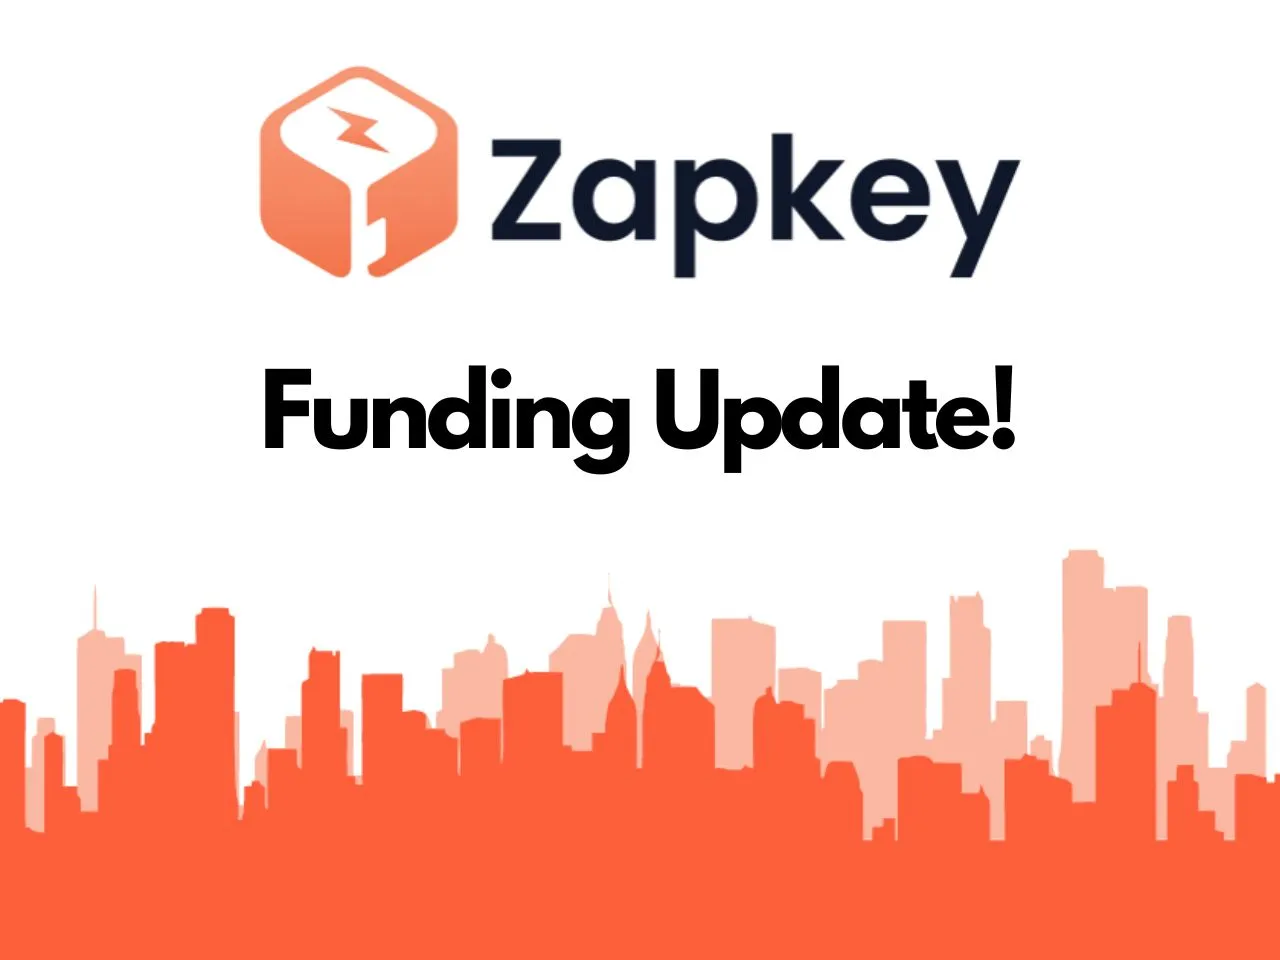 Home Sale Startup Zapkey Secures Pre-Series A Funding